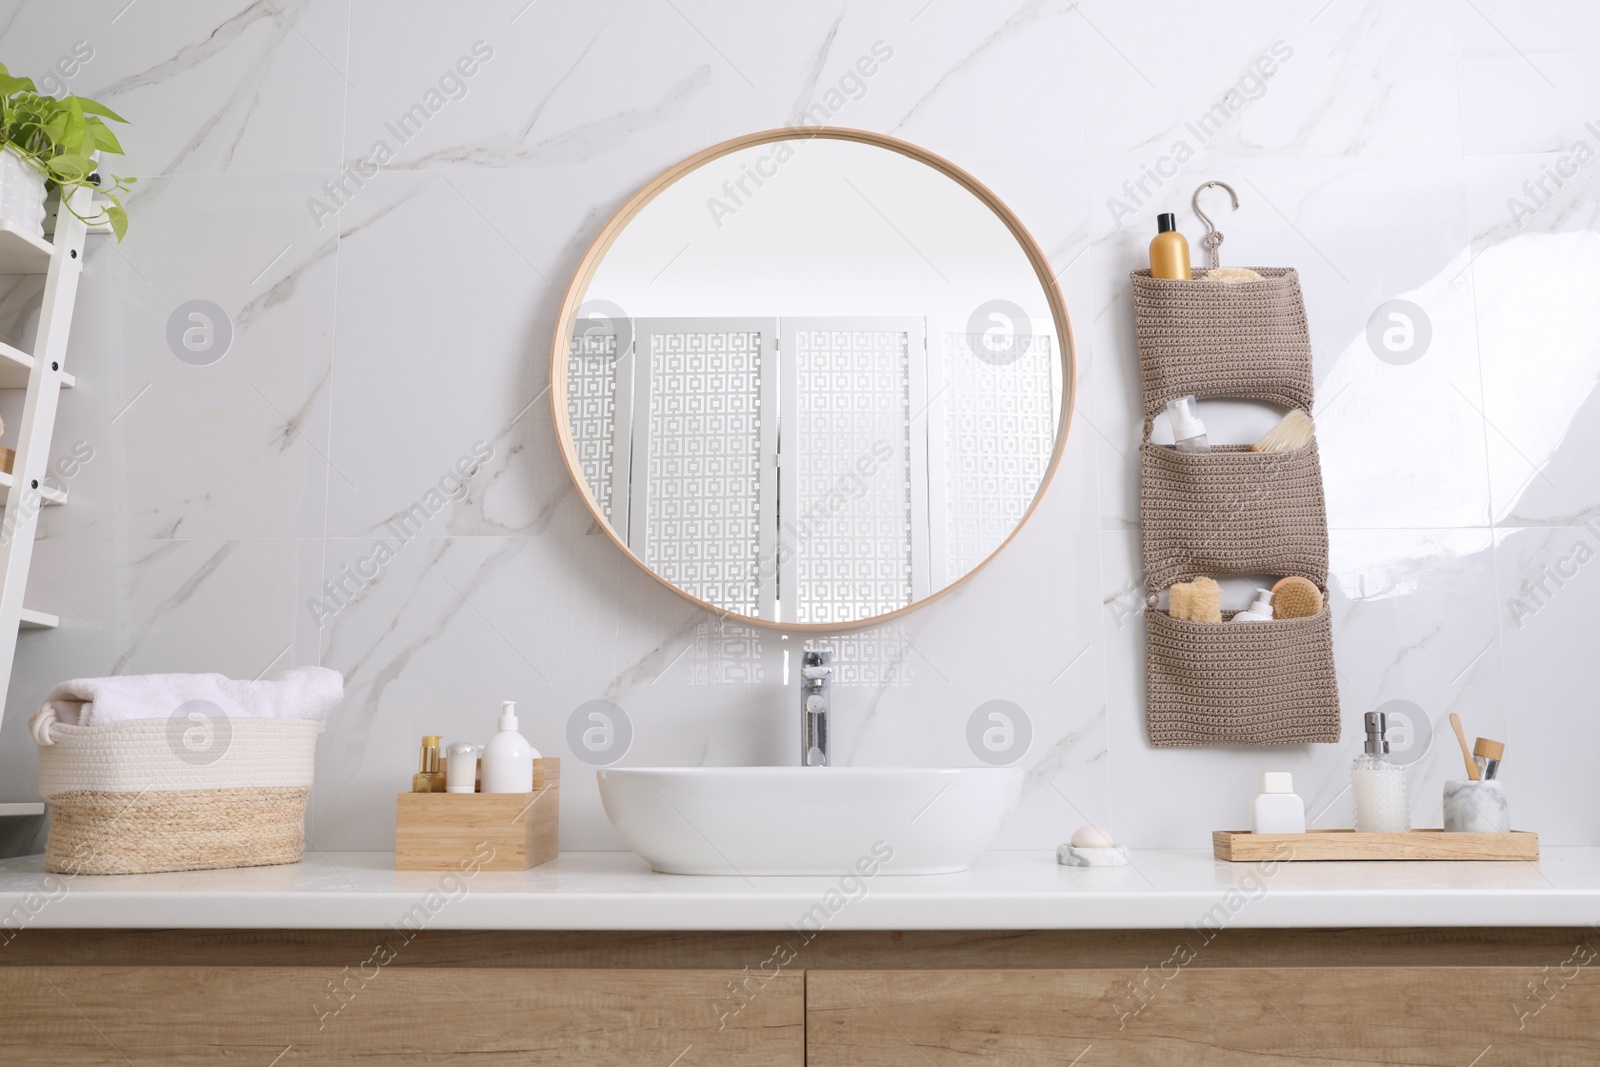 Photo of Bathroom interior with essentials and stylish accessories